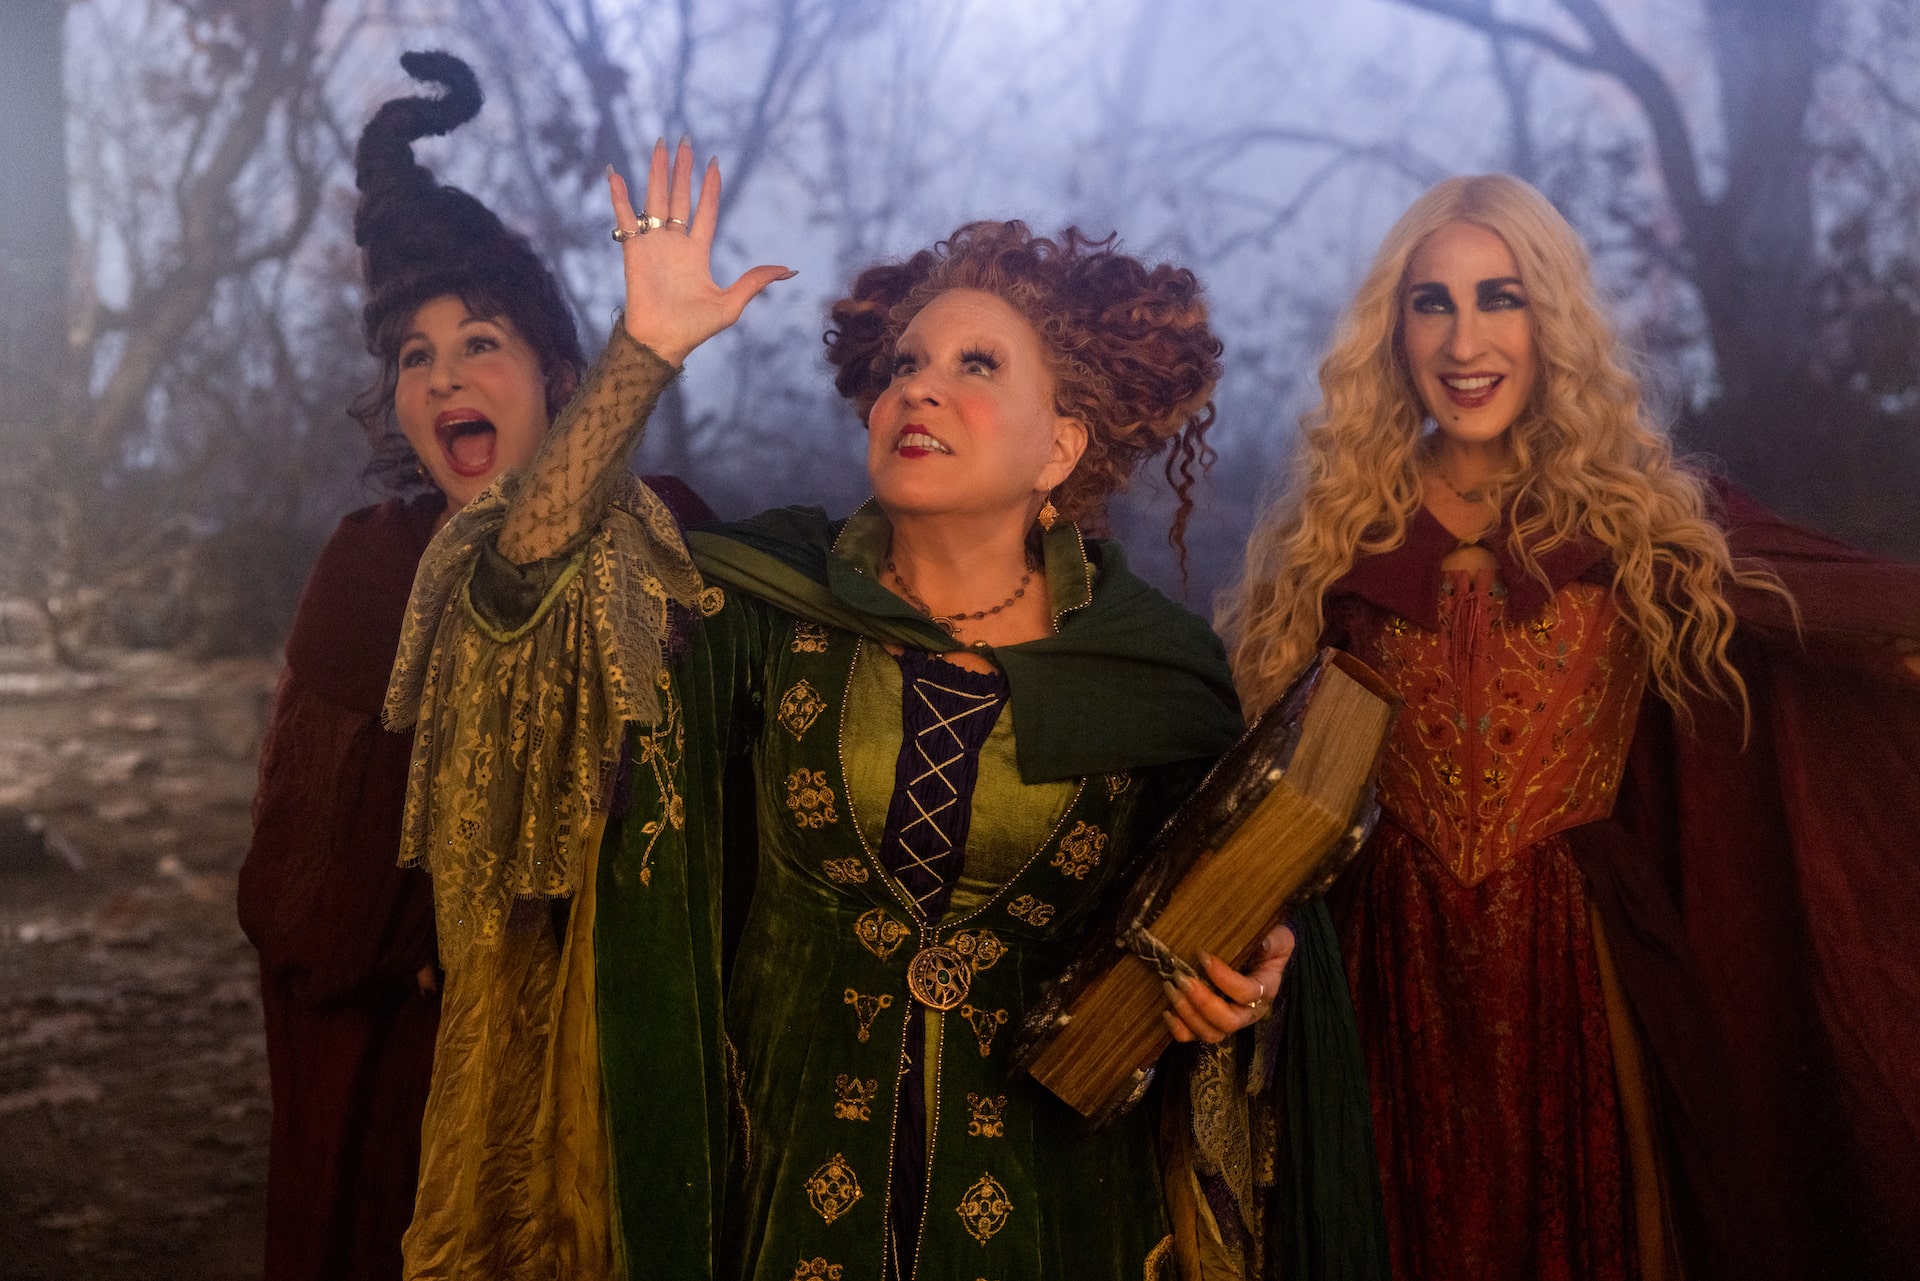 First 'Hocus Pocus 2' trailer and images emerge